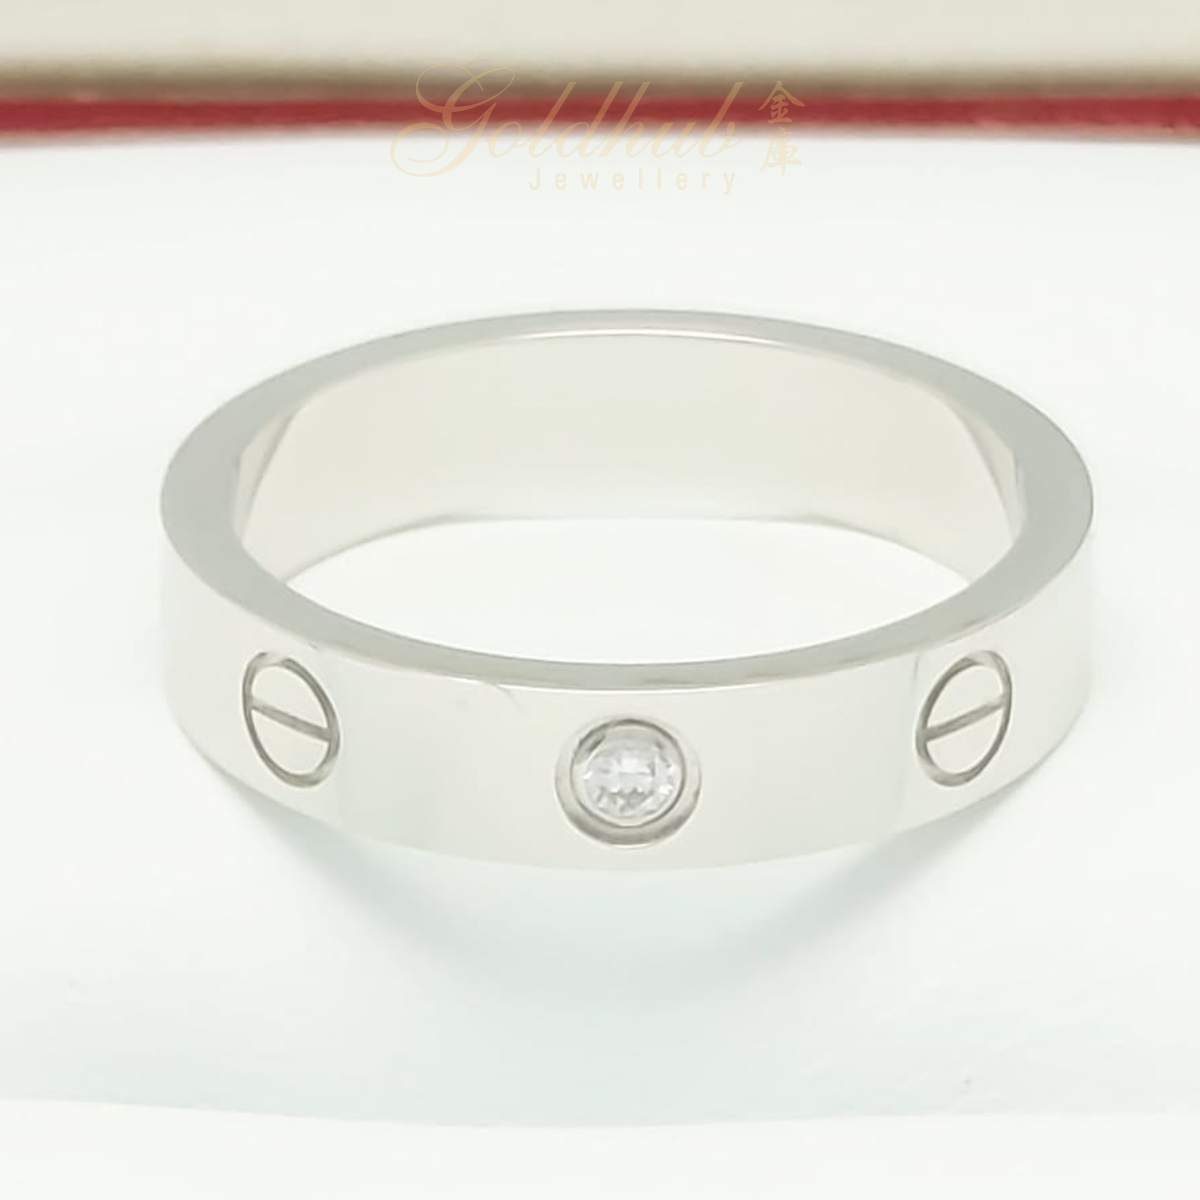 [RELOCATION SALES] 18k Pre-loved Cartier Love Wedding Band, 1 Diamond Ring in White Gold